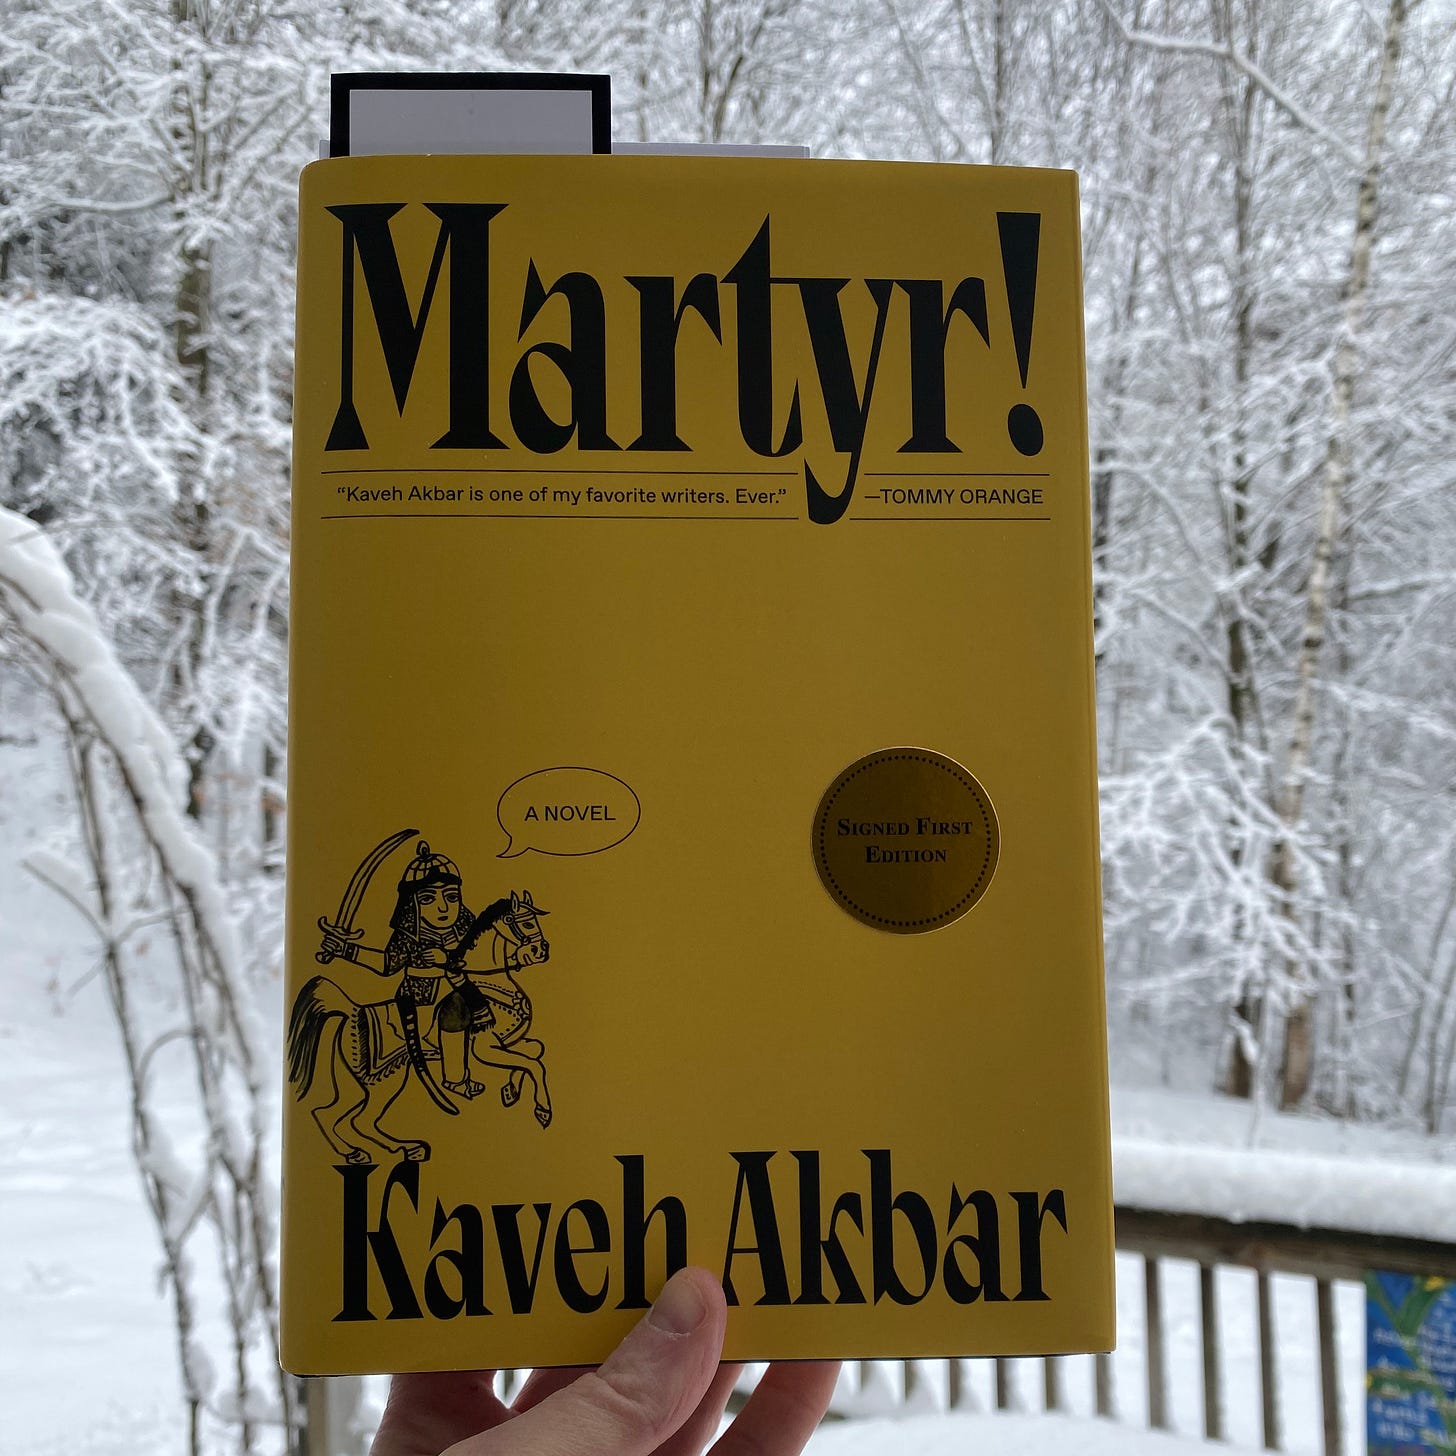 I’m holding up the bright yellow hardcover of Martyr! in front of a snowy forest.